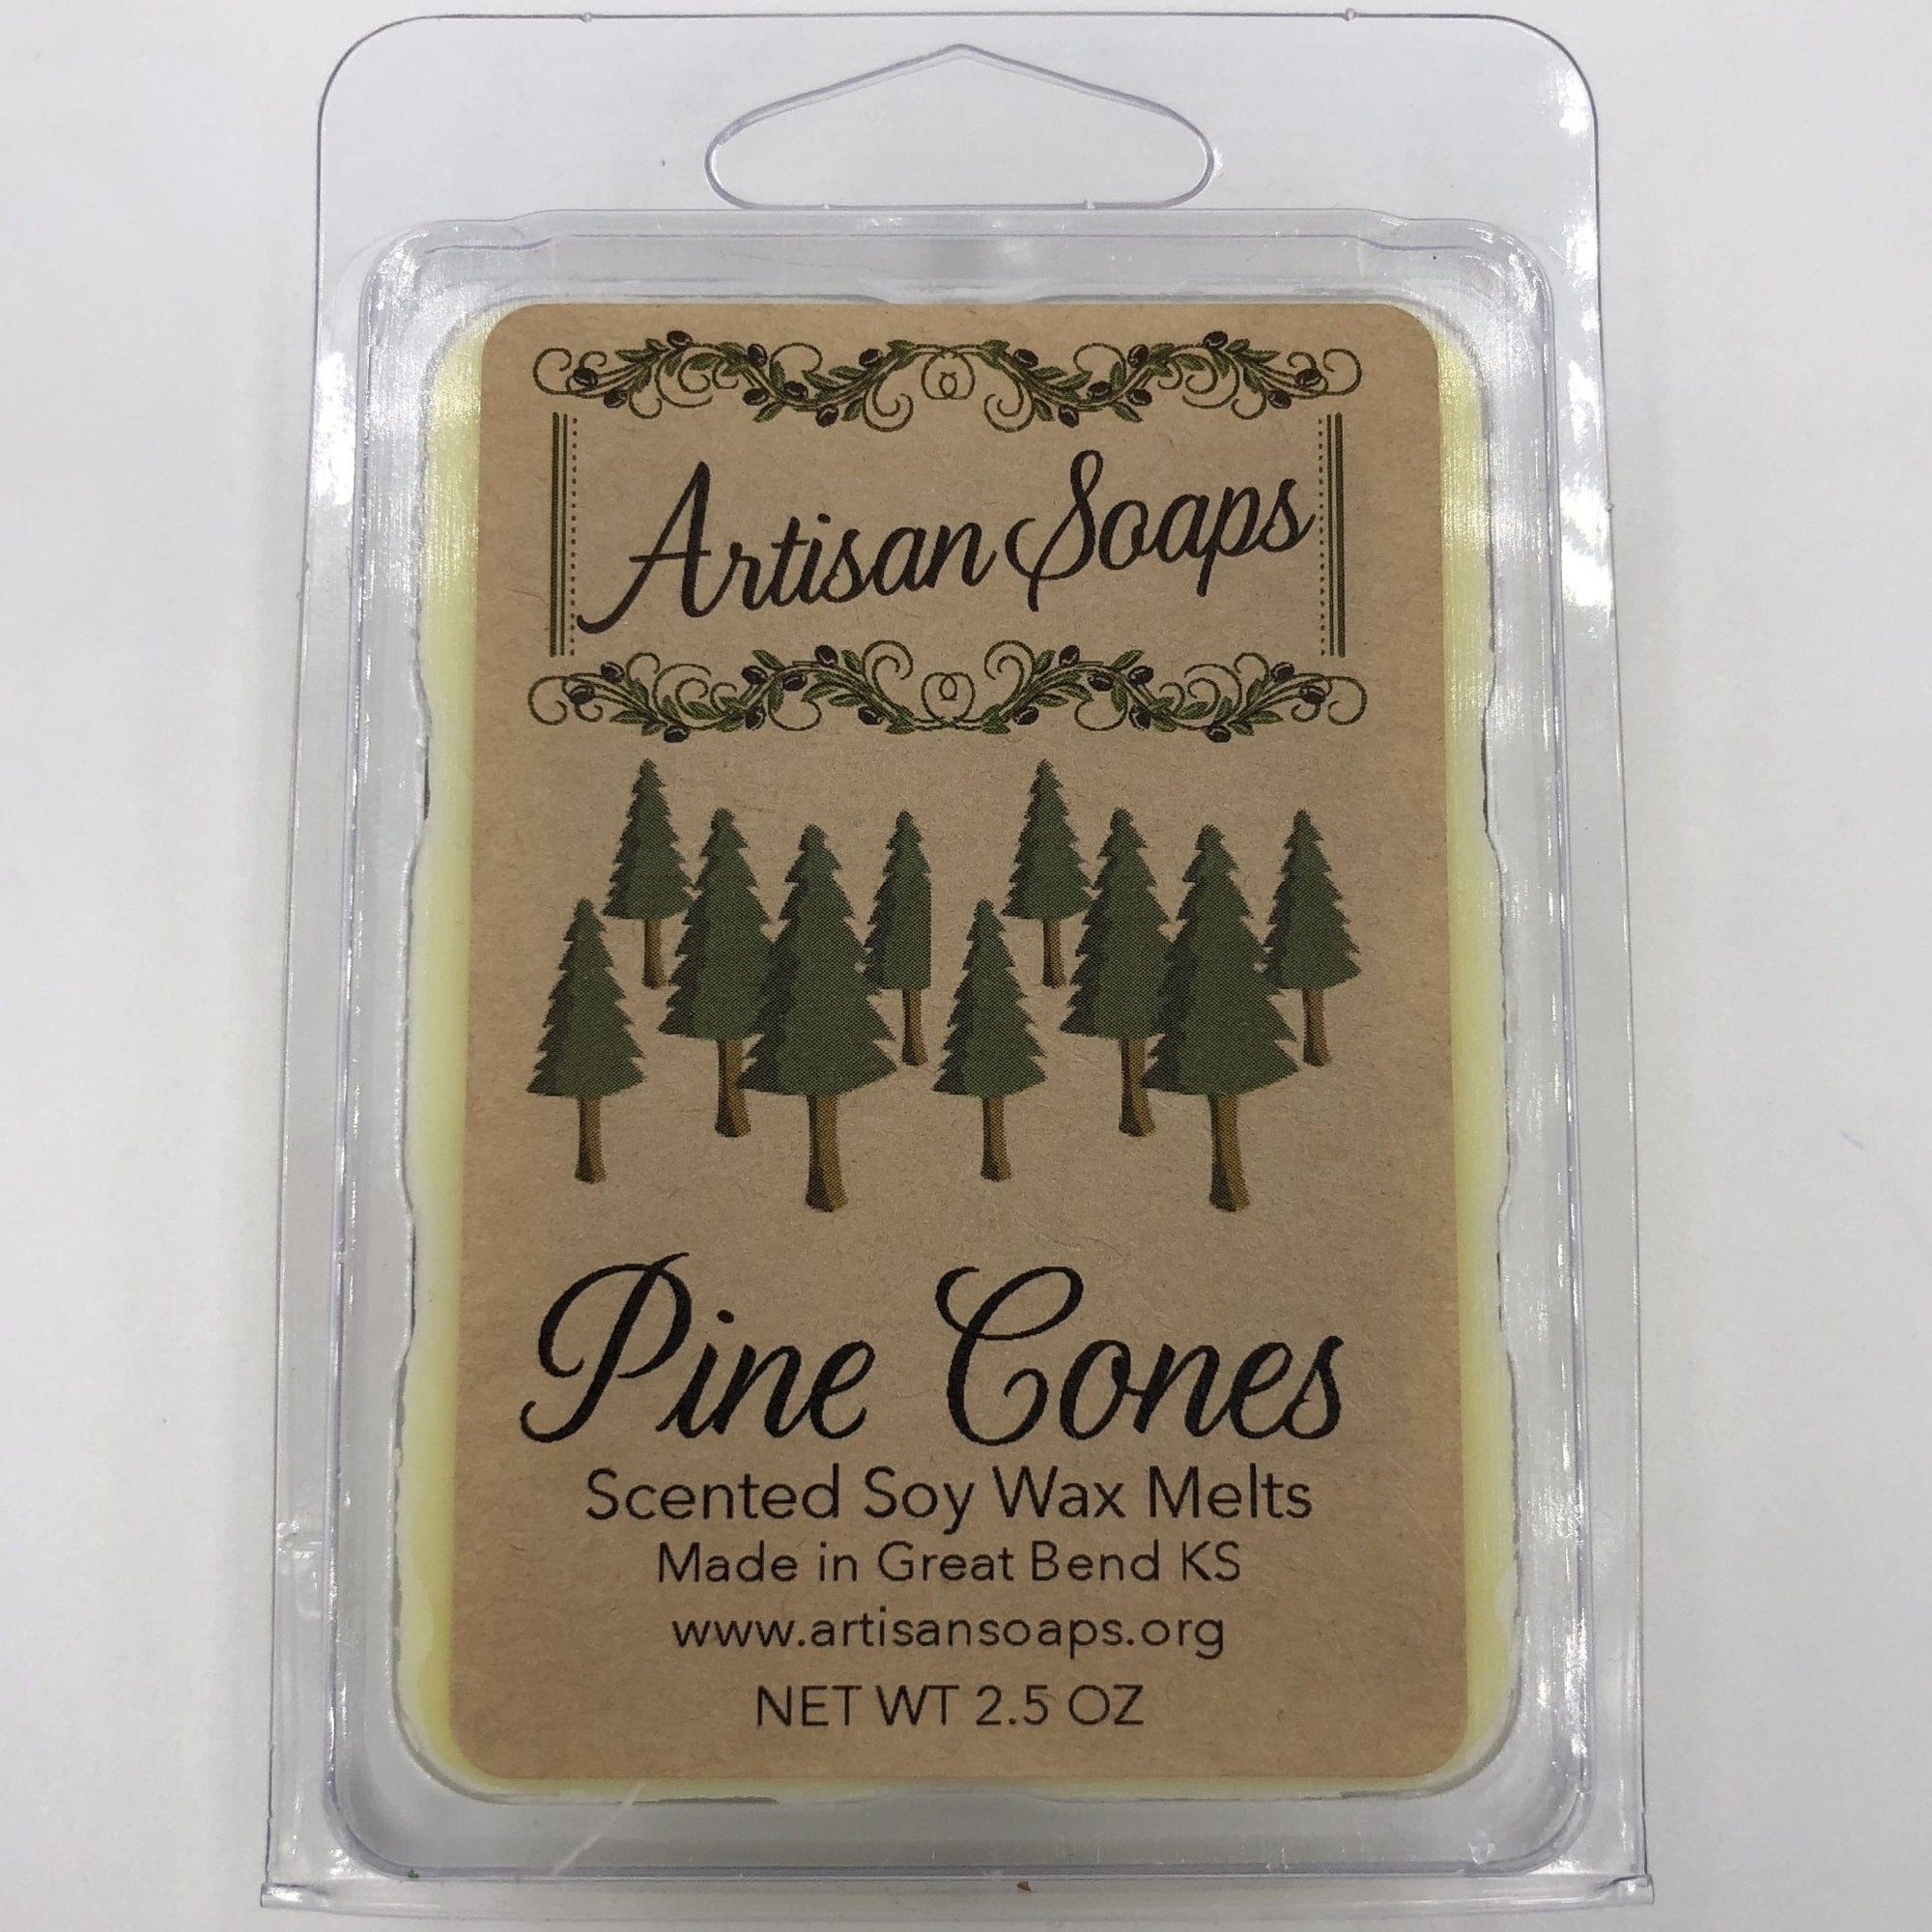 Pine Cones Soy Wax Melt - Artisan Soaps